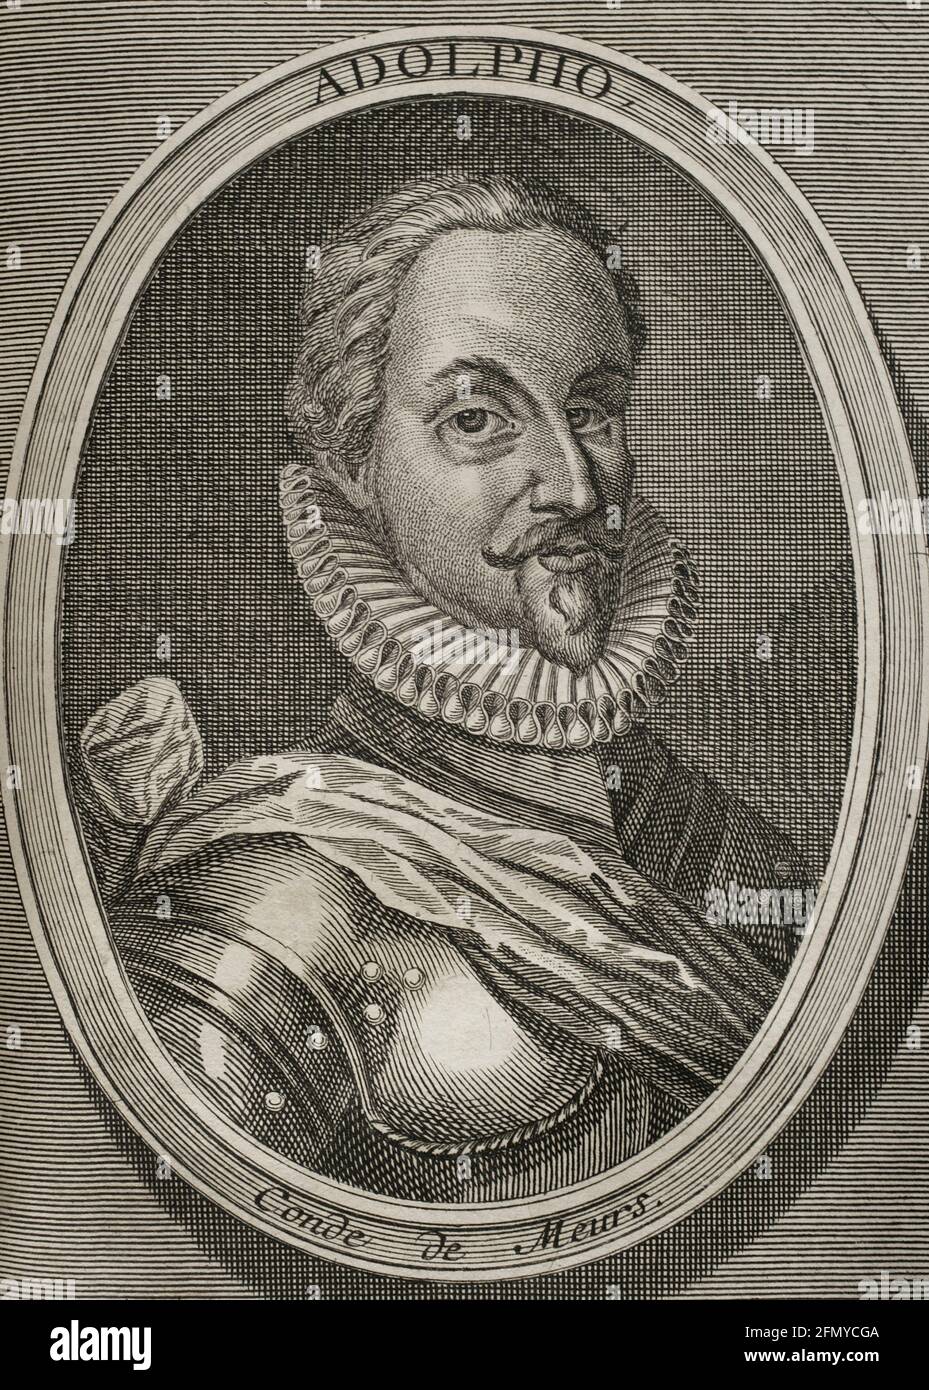 Adolf van Nieuwenaar (1545-1589). Count of Limburg and Moers. Stadtholder of Guelders, Utrecht and Overijssel for the States General of the Netherlands during the Eighty Years' War. Portrait. Engraving. Wars of Flanders. Edition published in Antwerp, 1748. Stock Photo